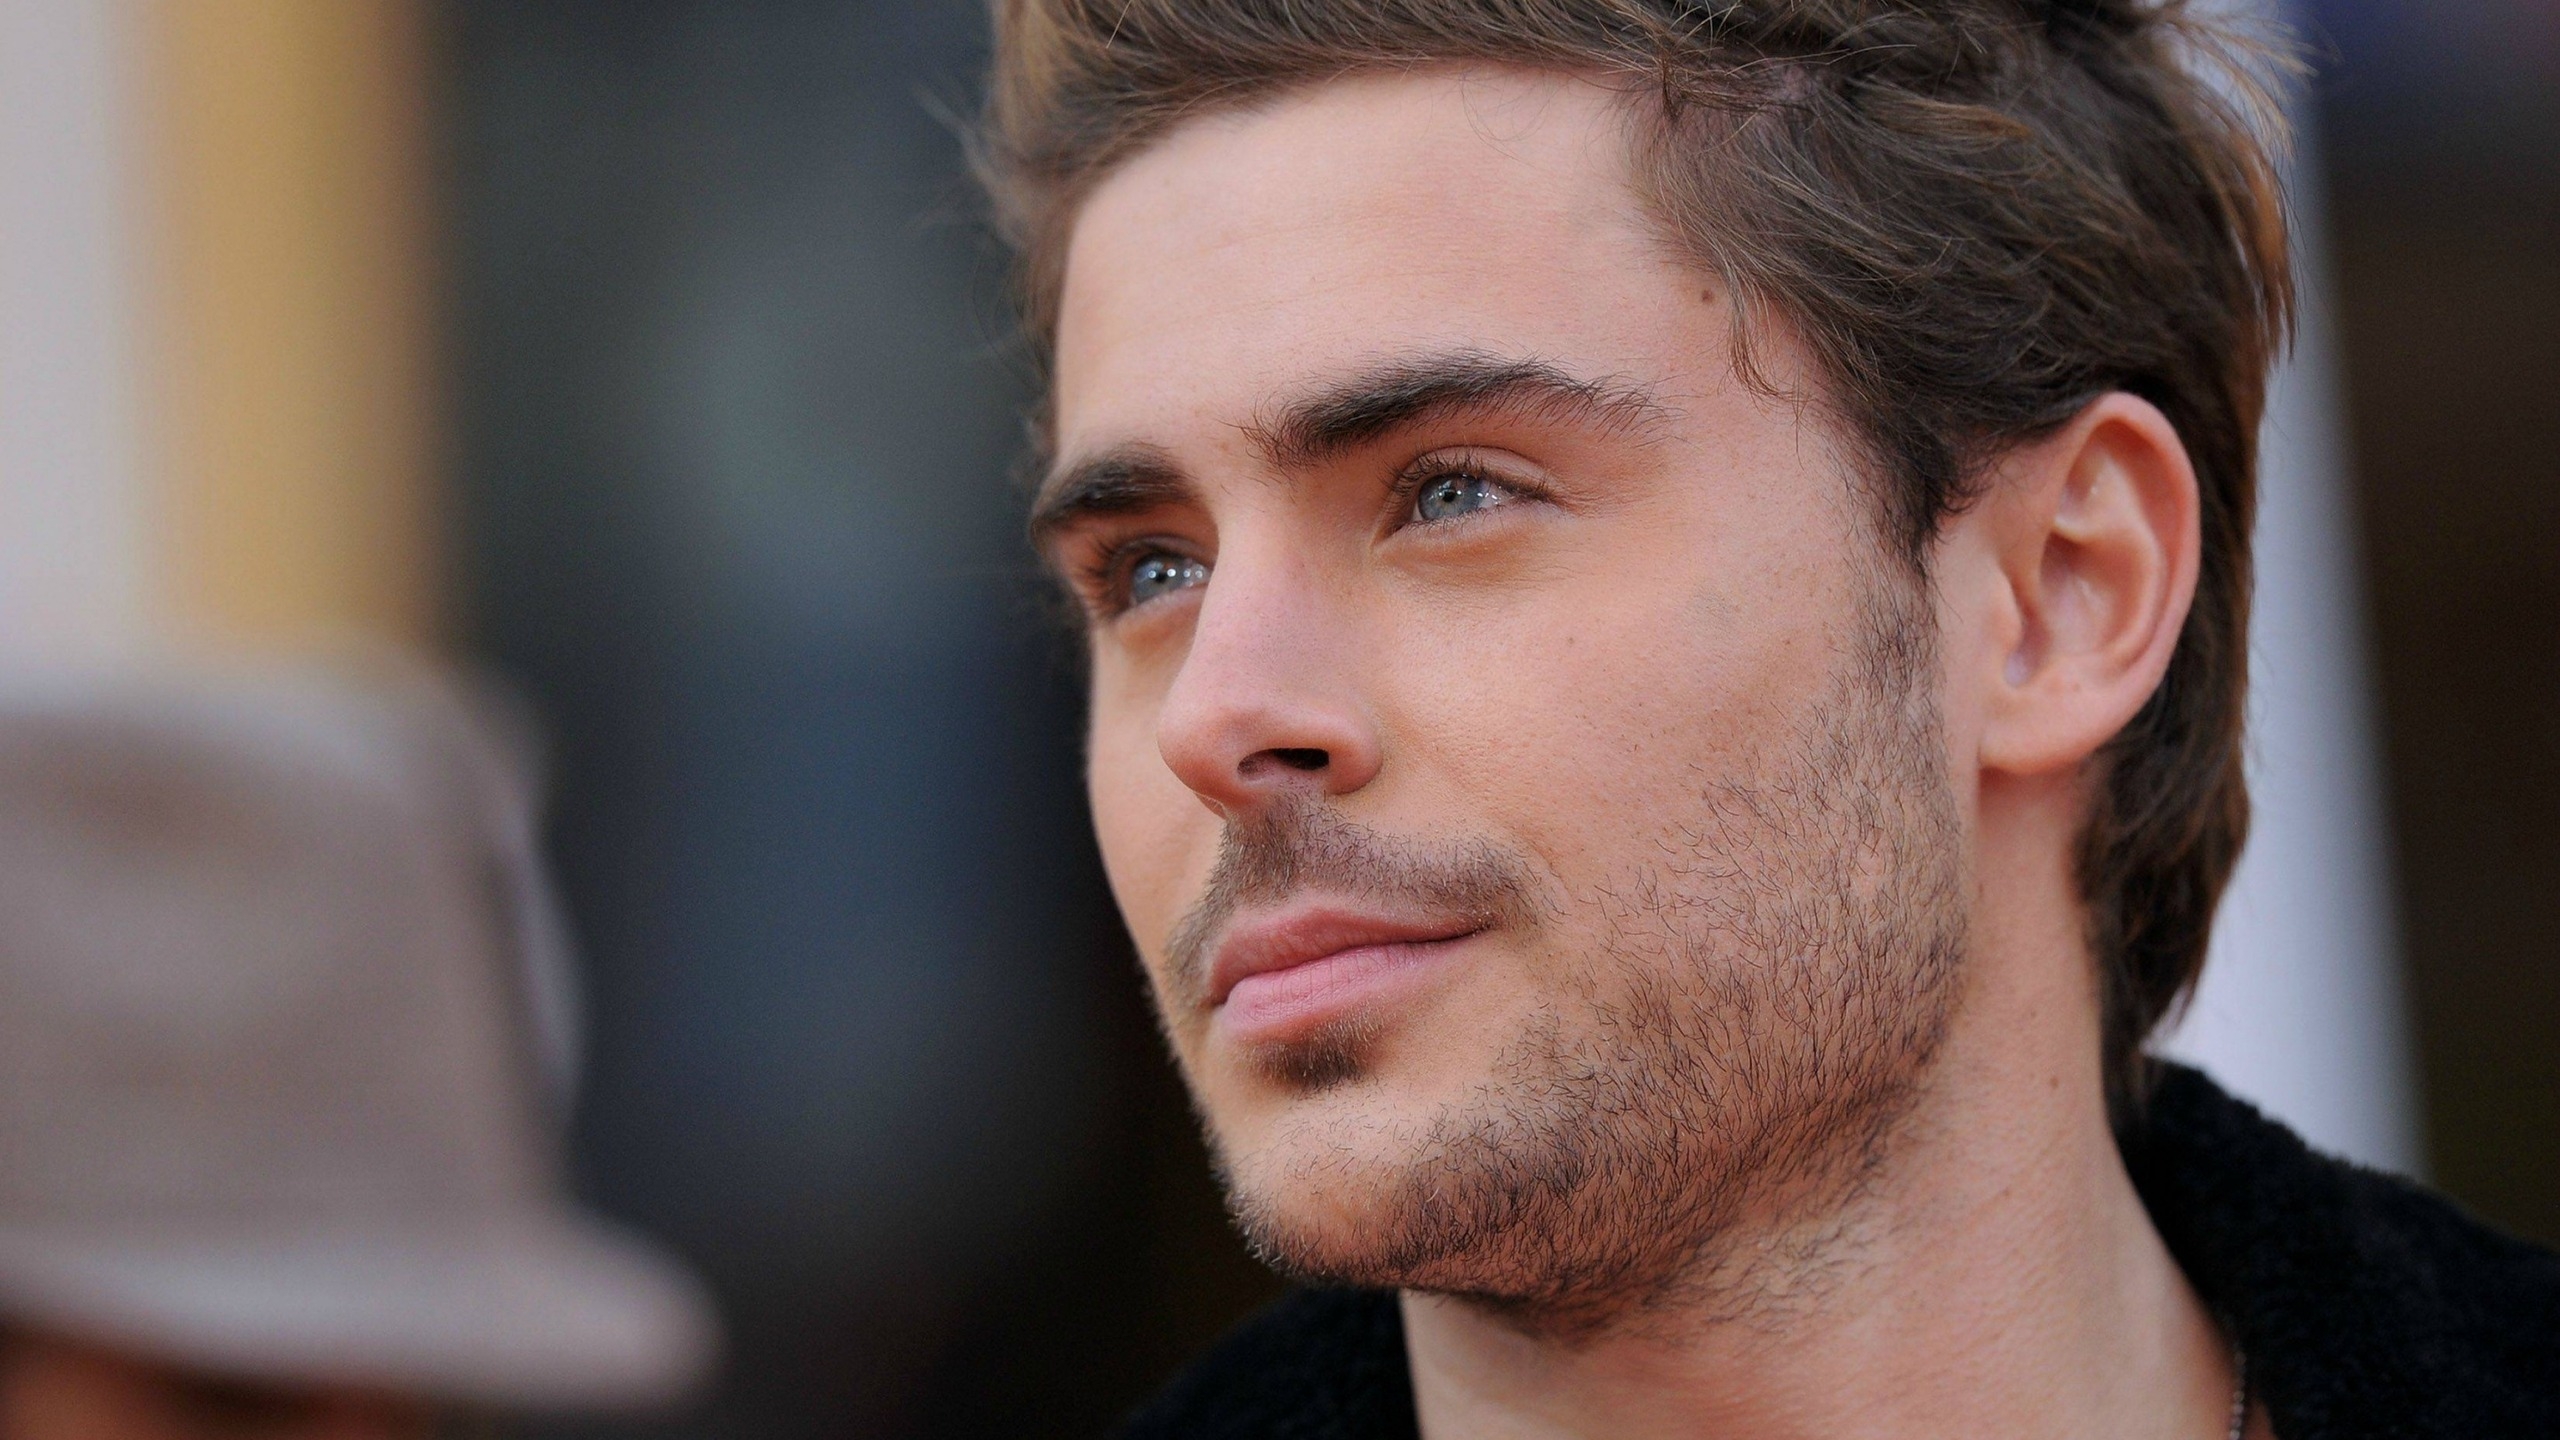 Zac Efron Actor for 2560x1440 HDTV resolution